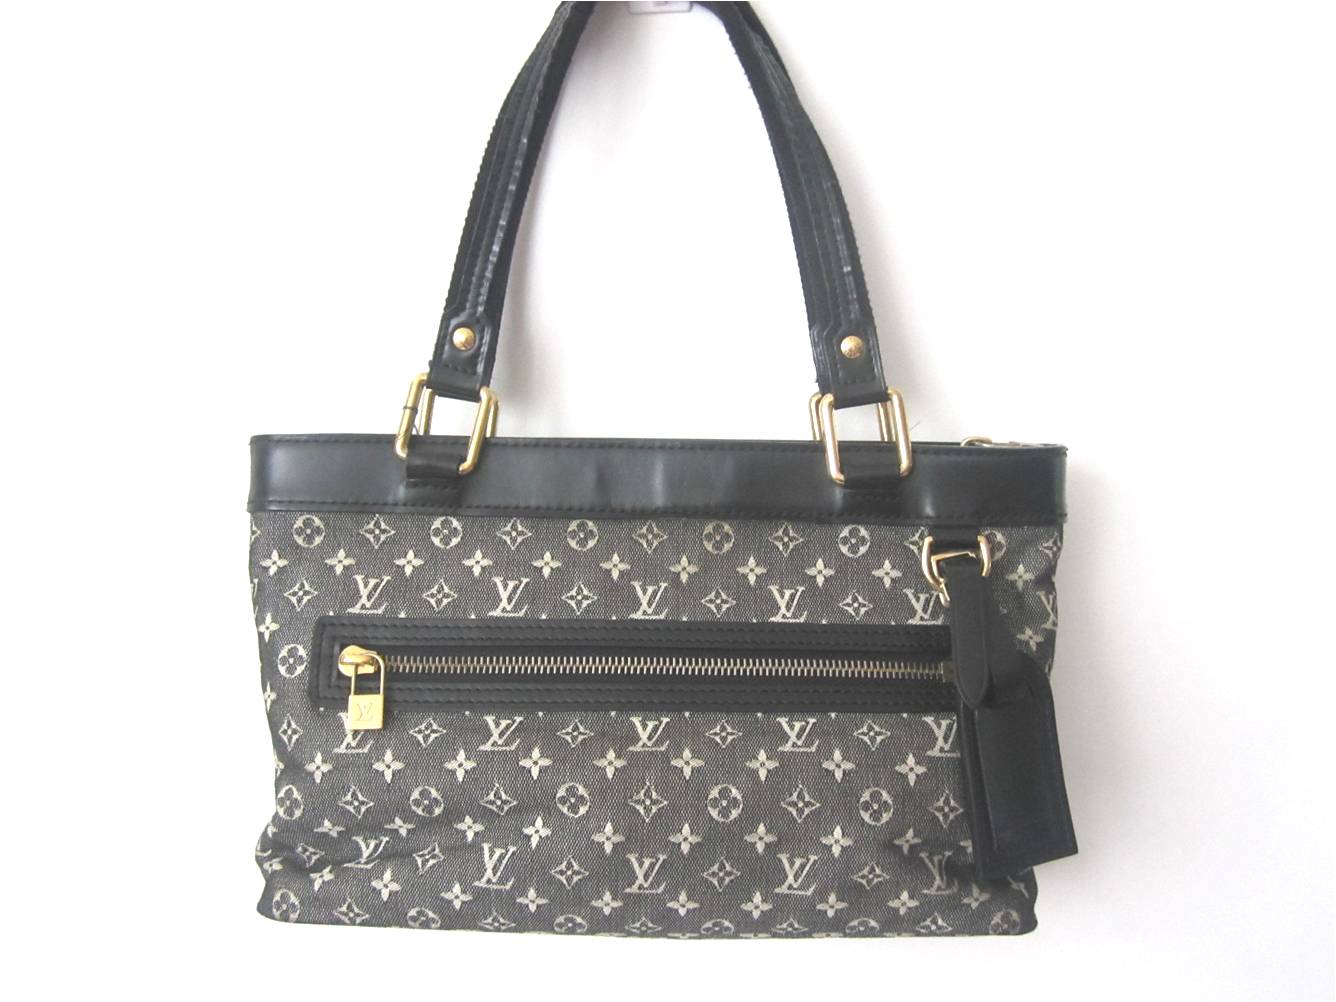 The Bags Affairs ~ Satisfy your lust for designer bags: LOUIS VUITTON BLACK MINI LIN LUCILLE ...